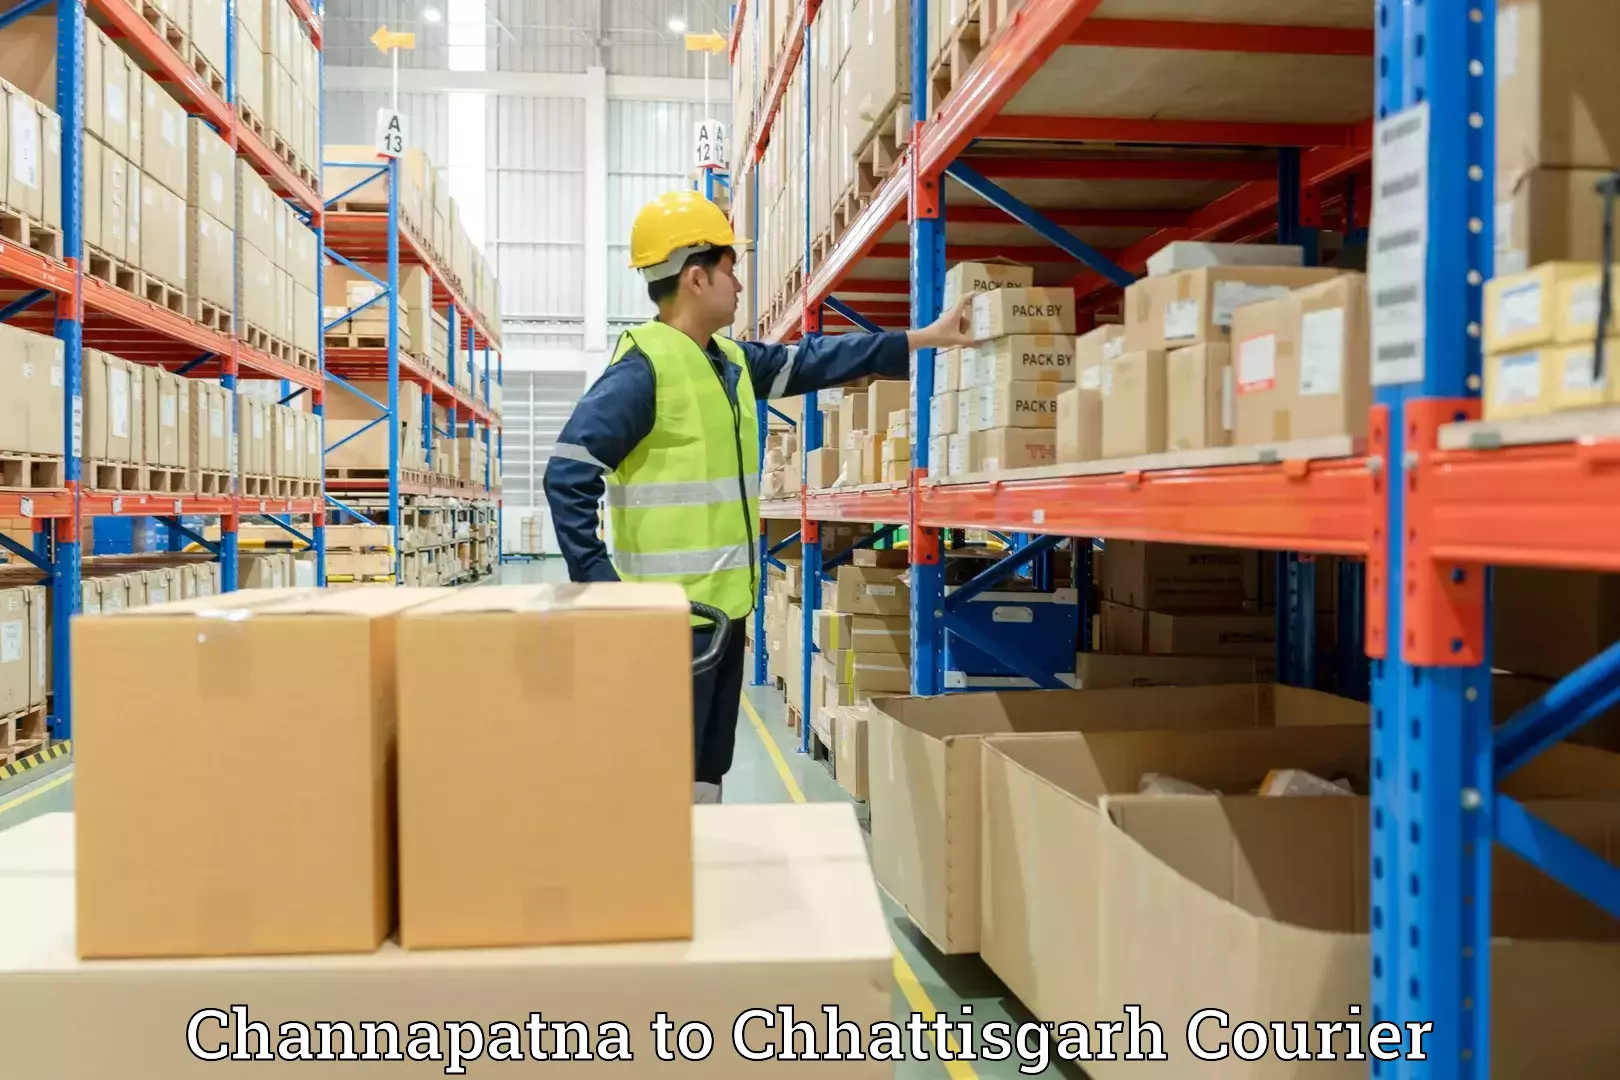 Furniture movers and packers Channapatna to Chhattisgarh